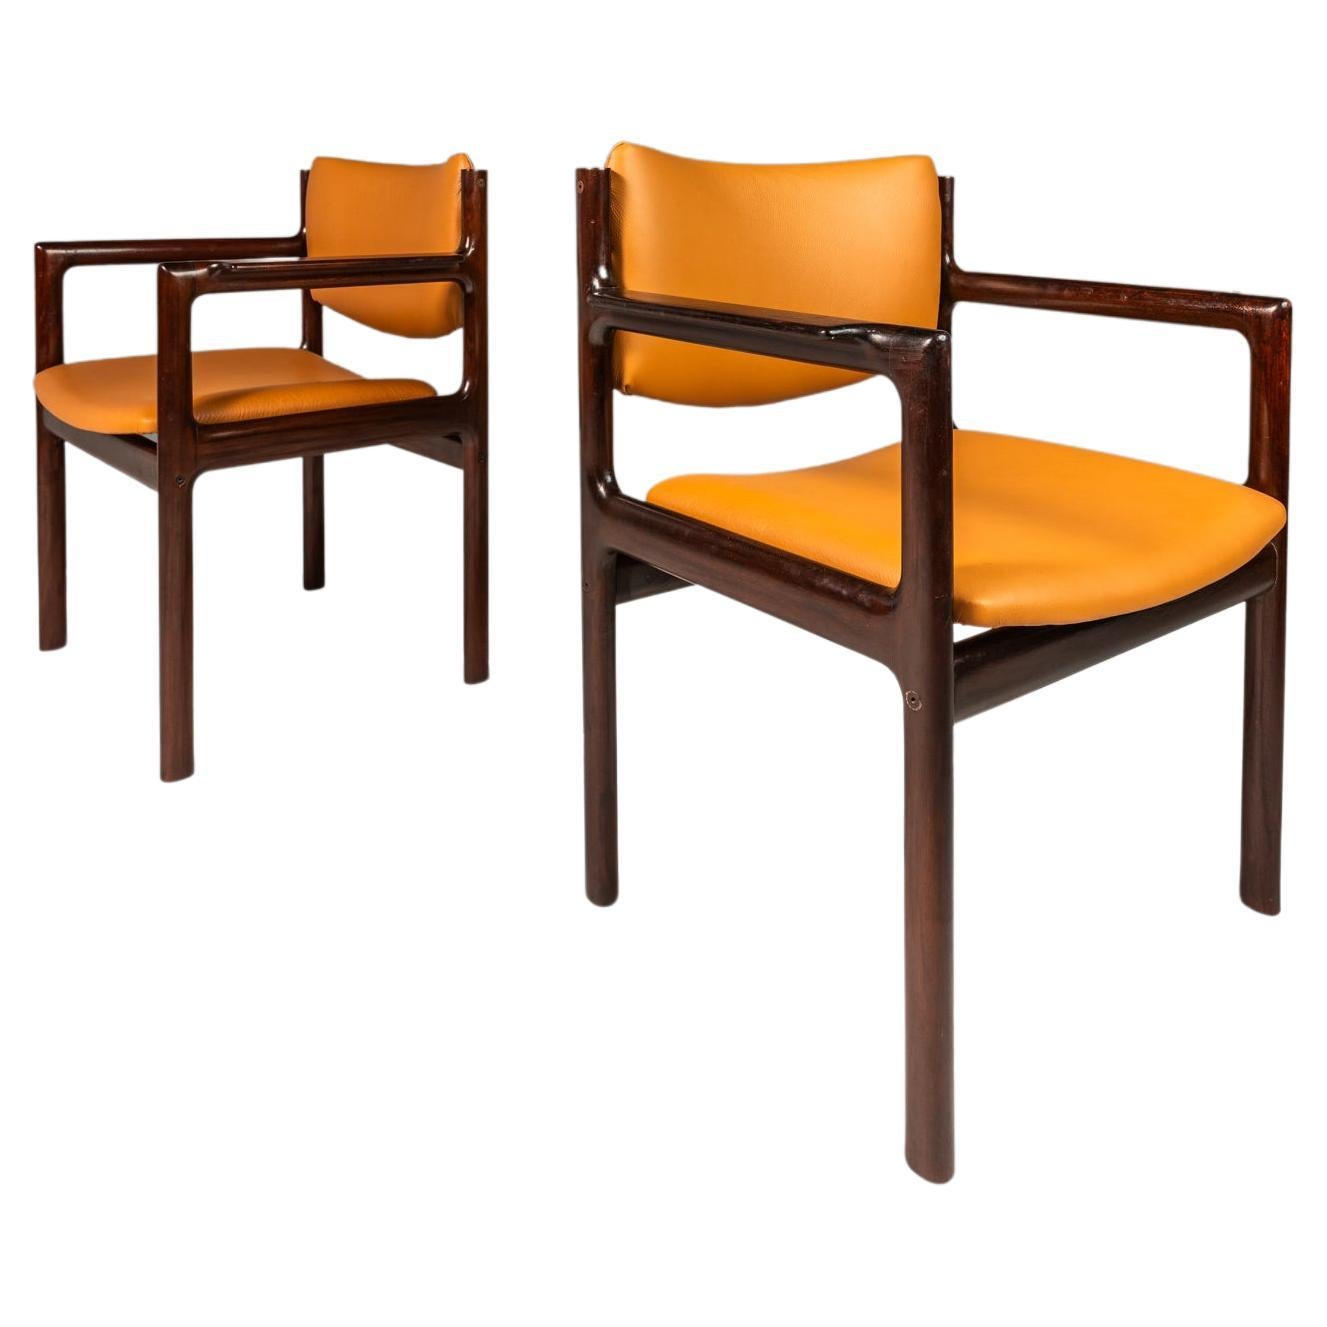 Set of 2 Mahogany & Leather Arm Chairs, Danish Overseas Imports, c. 1960's For Sale